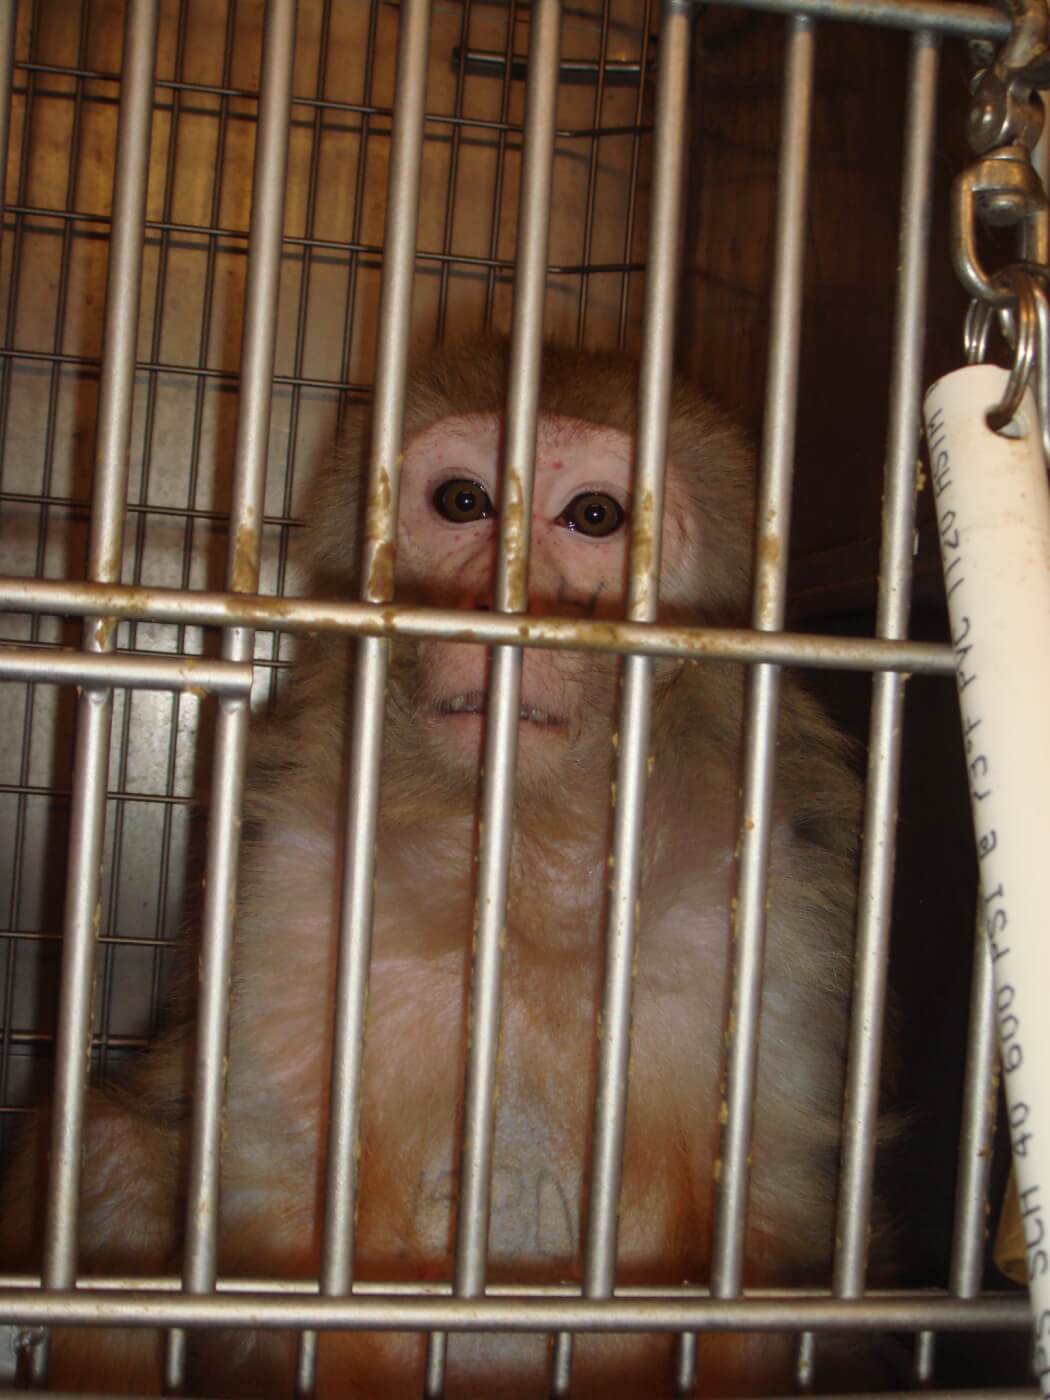 onprc 2008 peta investigation penelope Violations of the Federal Animal Welfare Act in the Laboratories of Oregon Health & Science University